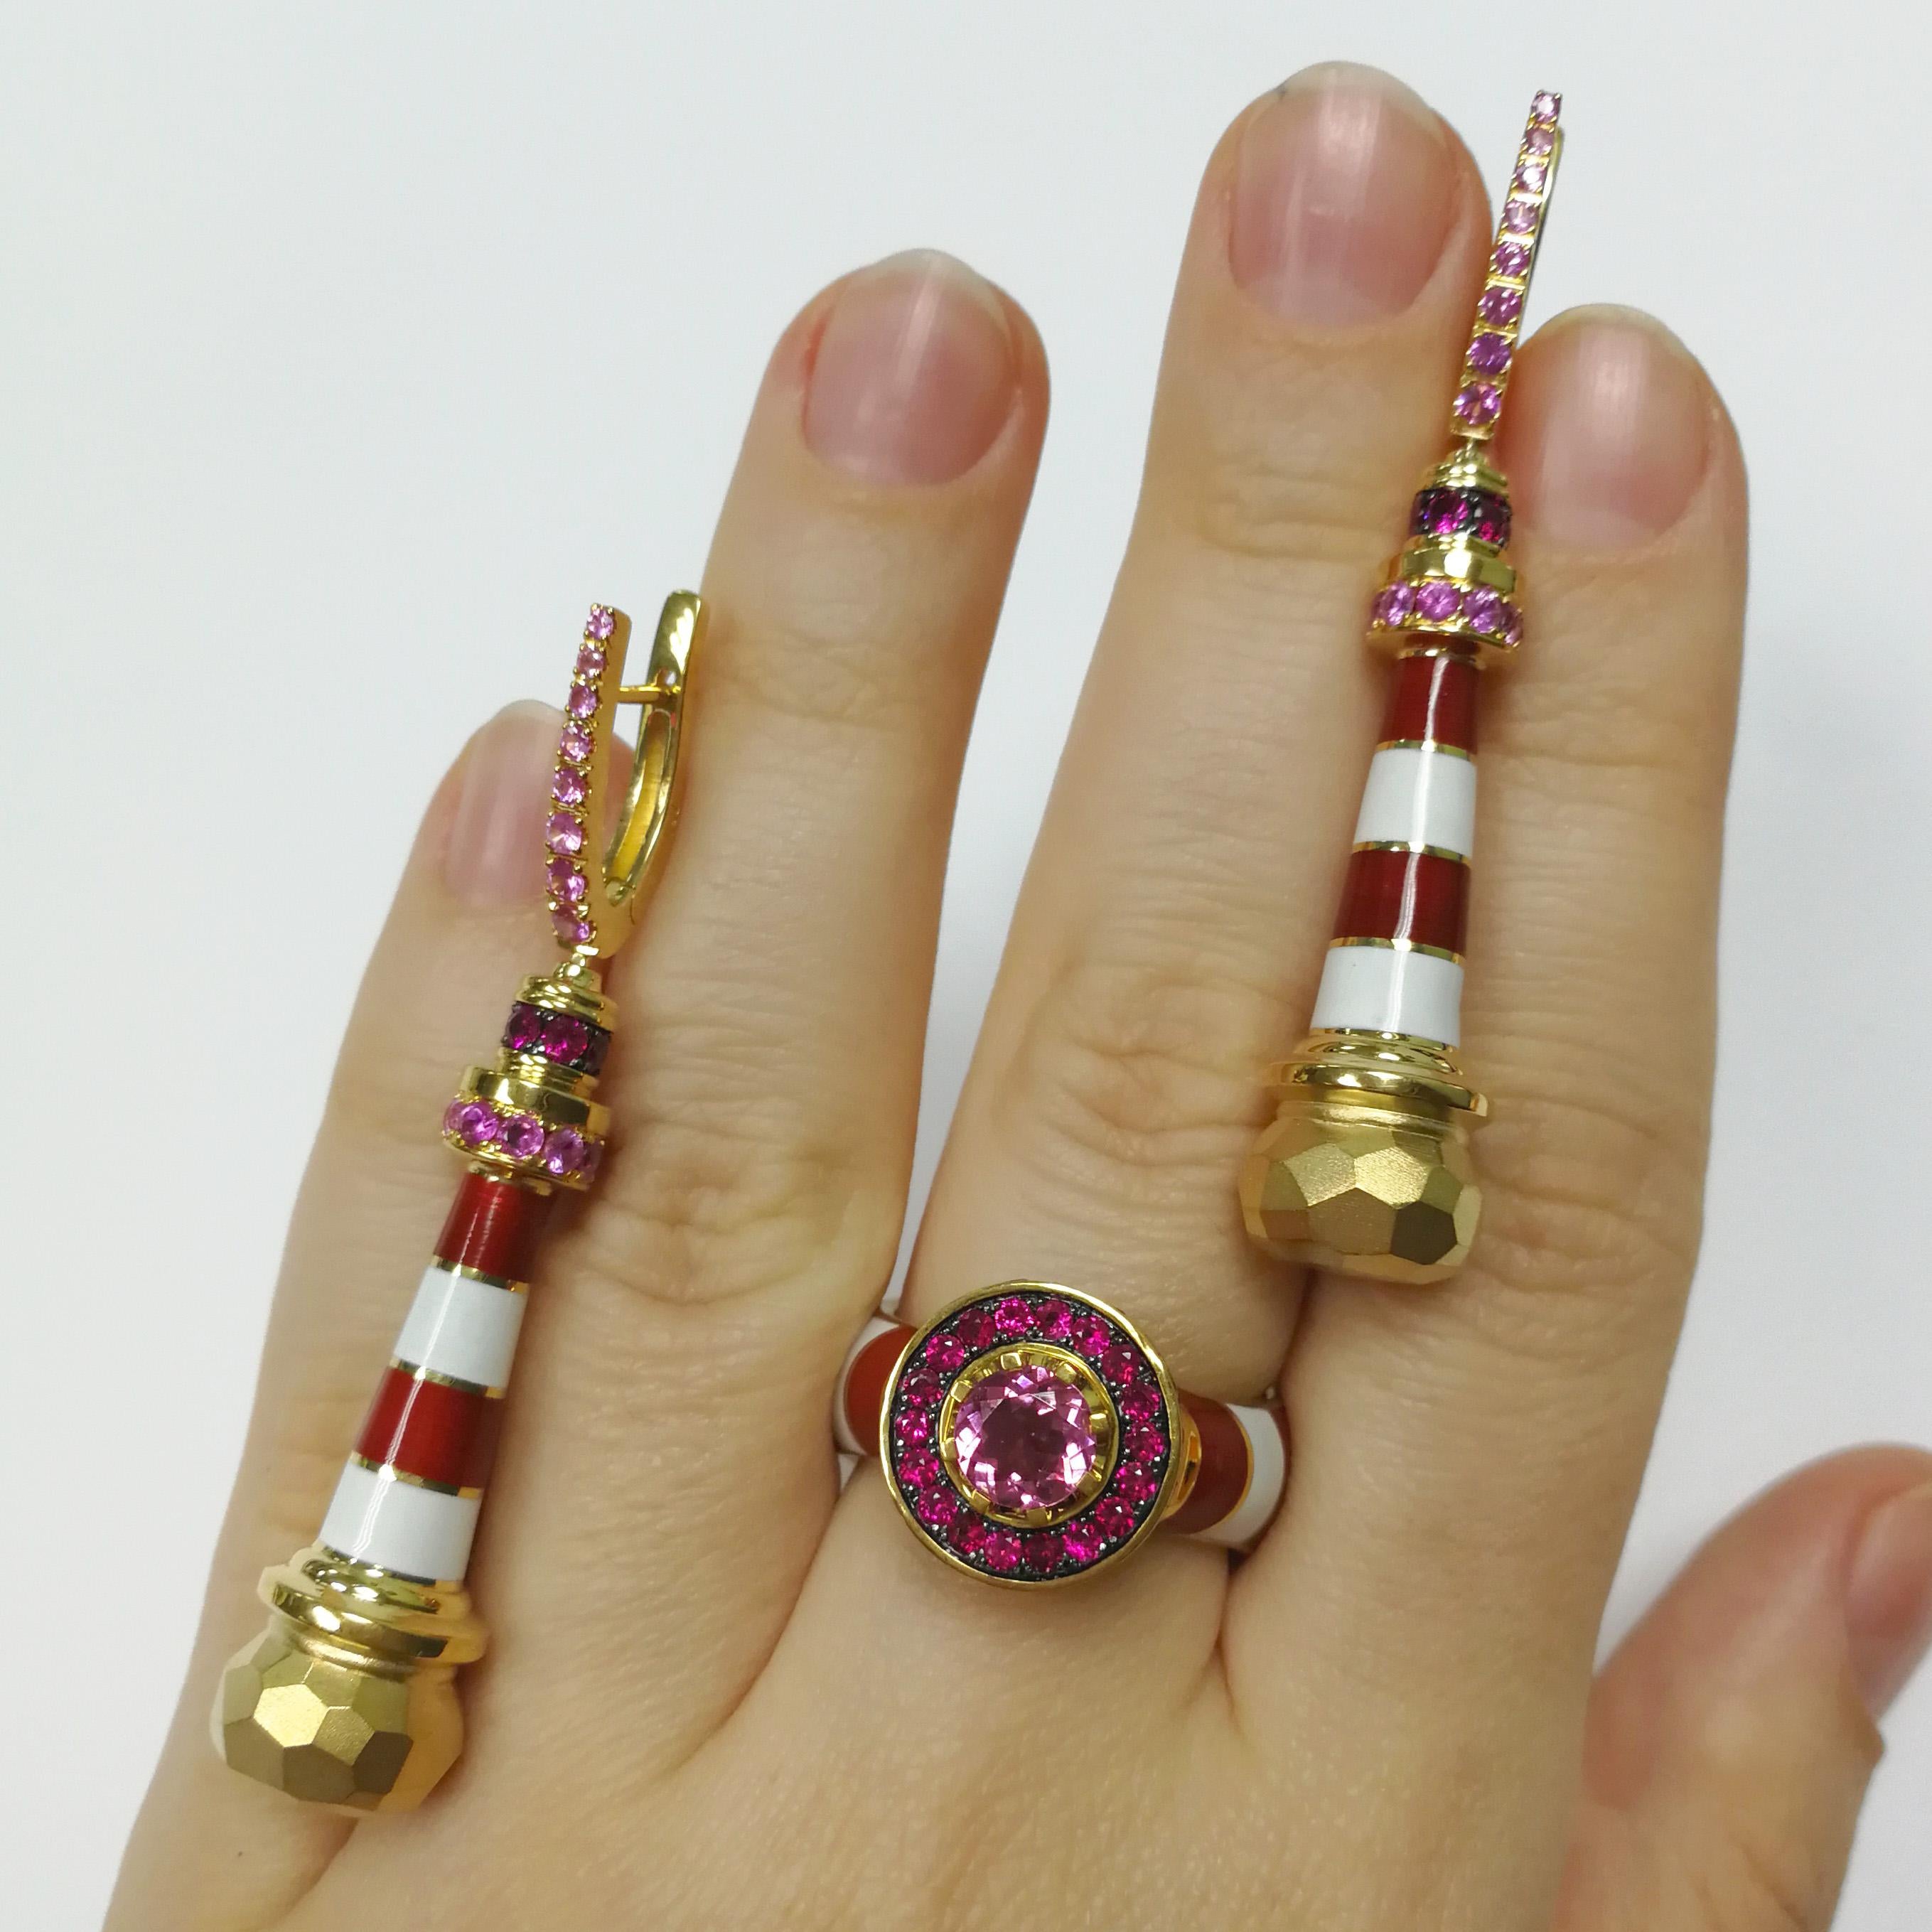 Pink Tourmaline Ruby Sapphire 18 Karat Yellow Gold Lighthouse Suite
The lighthouse is the place where the light is born and after a moment the light dies and it repeats again and again. Since the days of the famous Alexandria Lighthouse, the towers